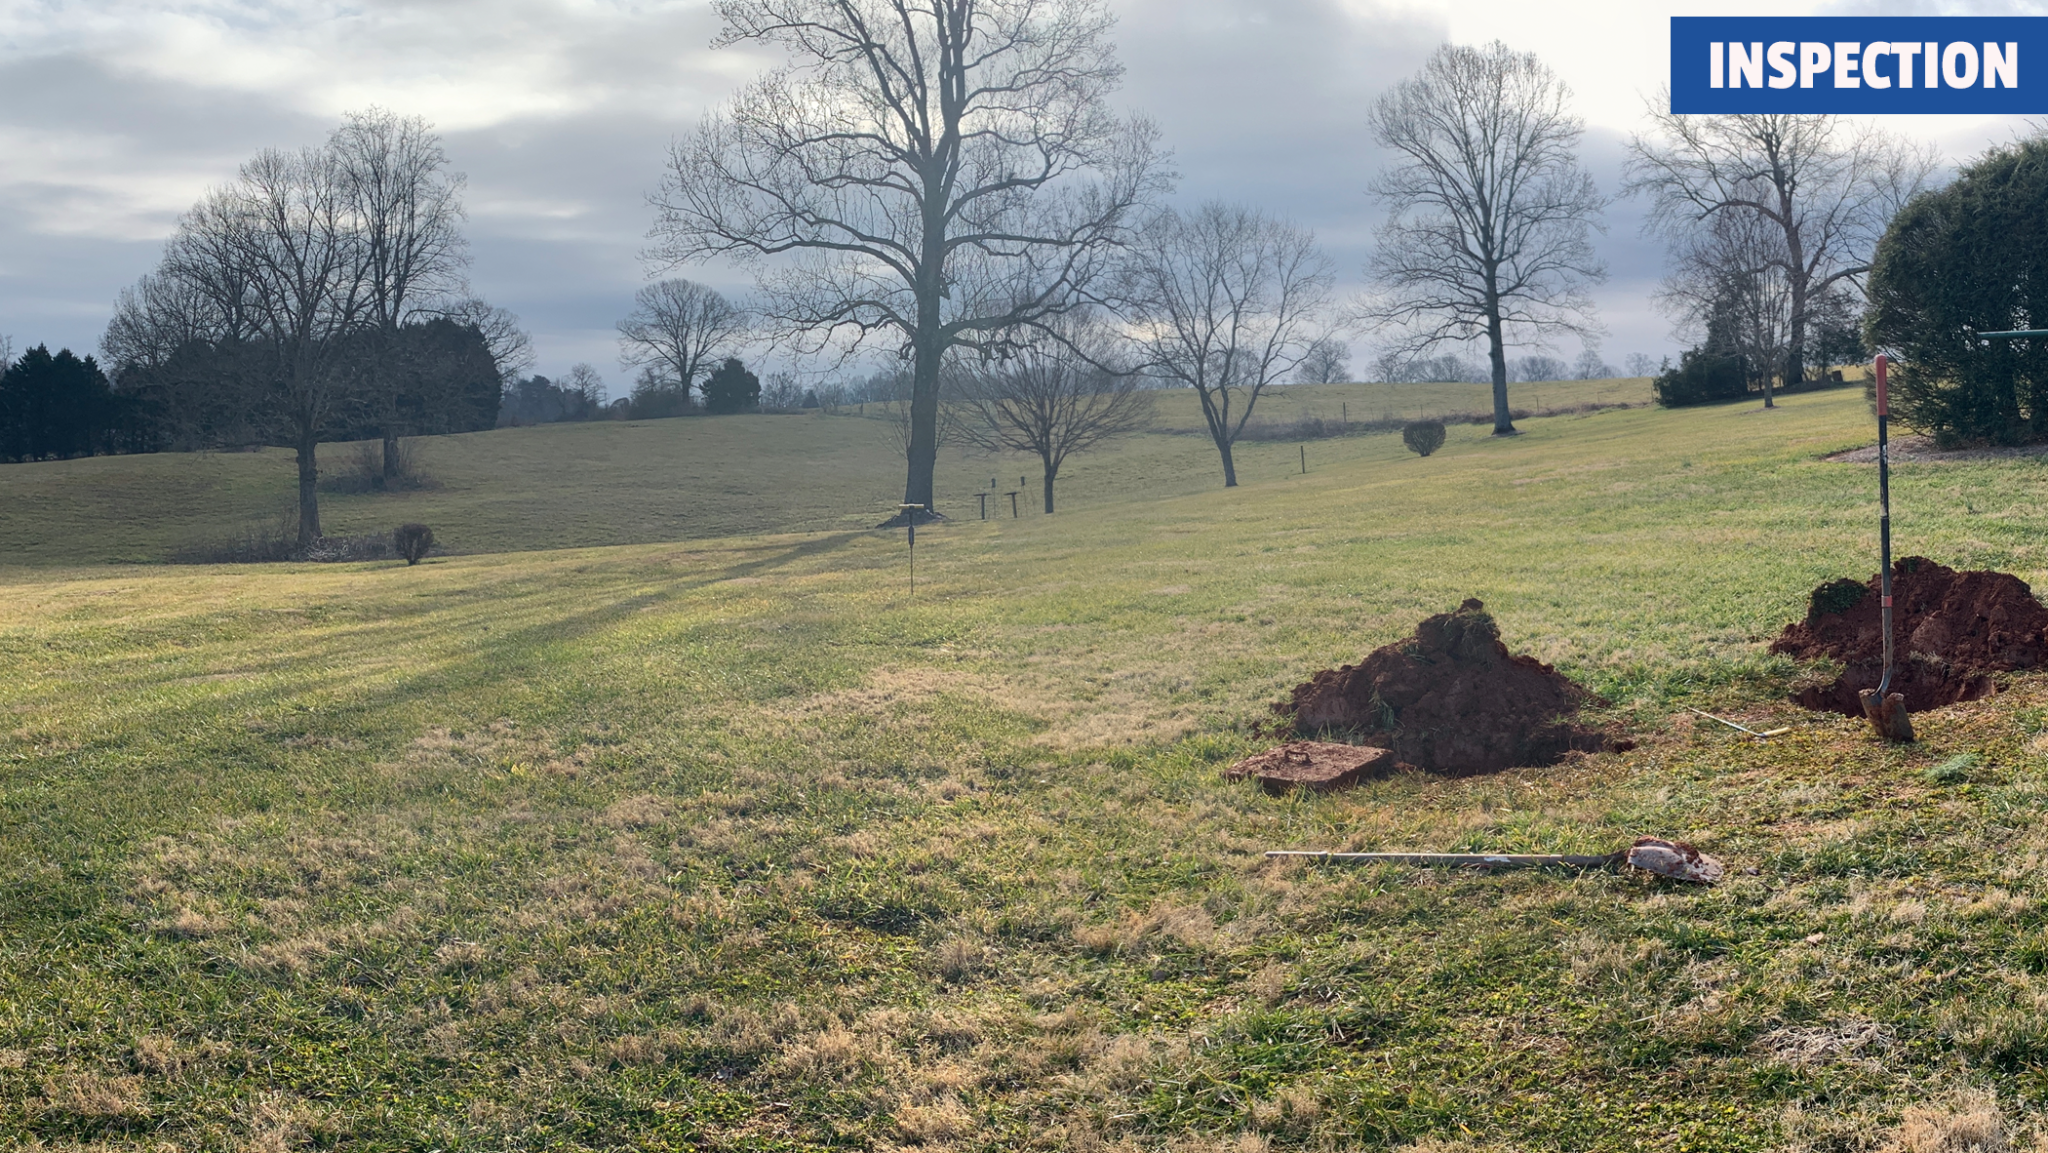 TW Ammons Septic - The view of a backyard during a septic inspection. The septic tank outlet and inlet are uncovered.